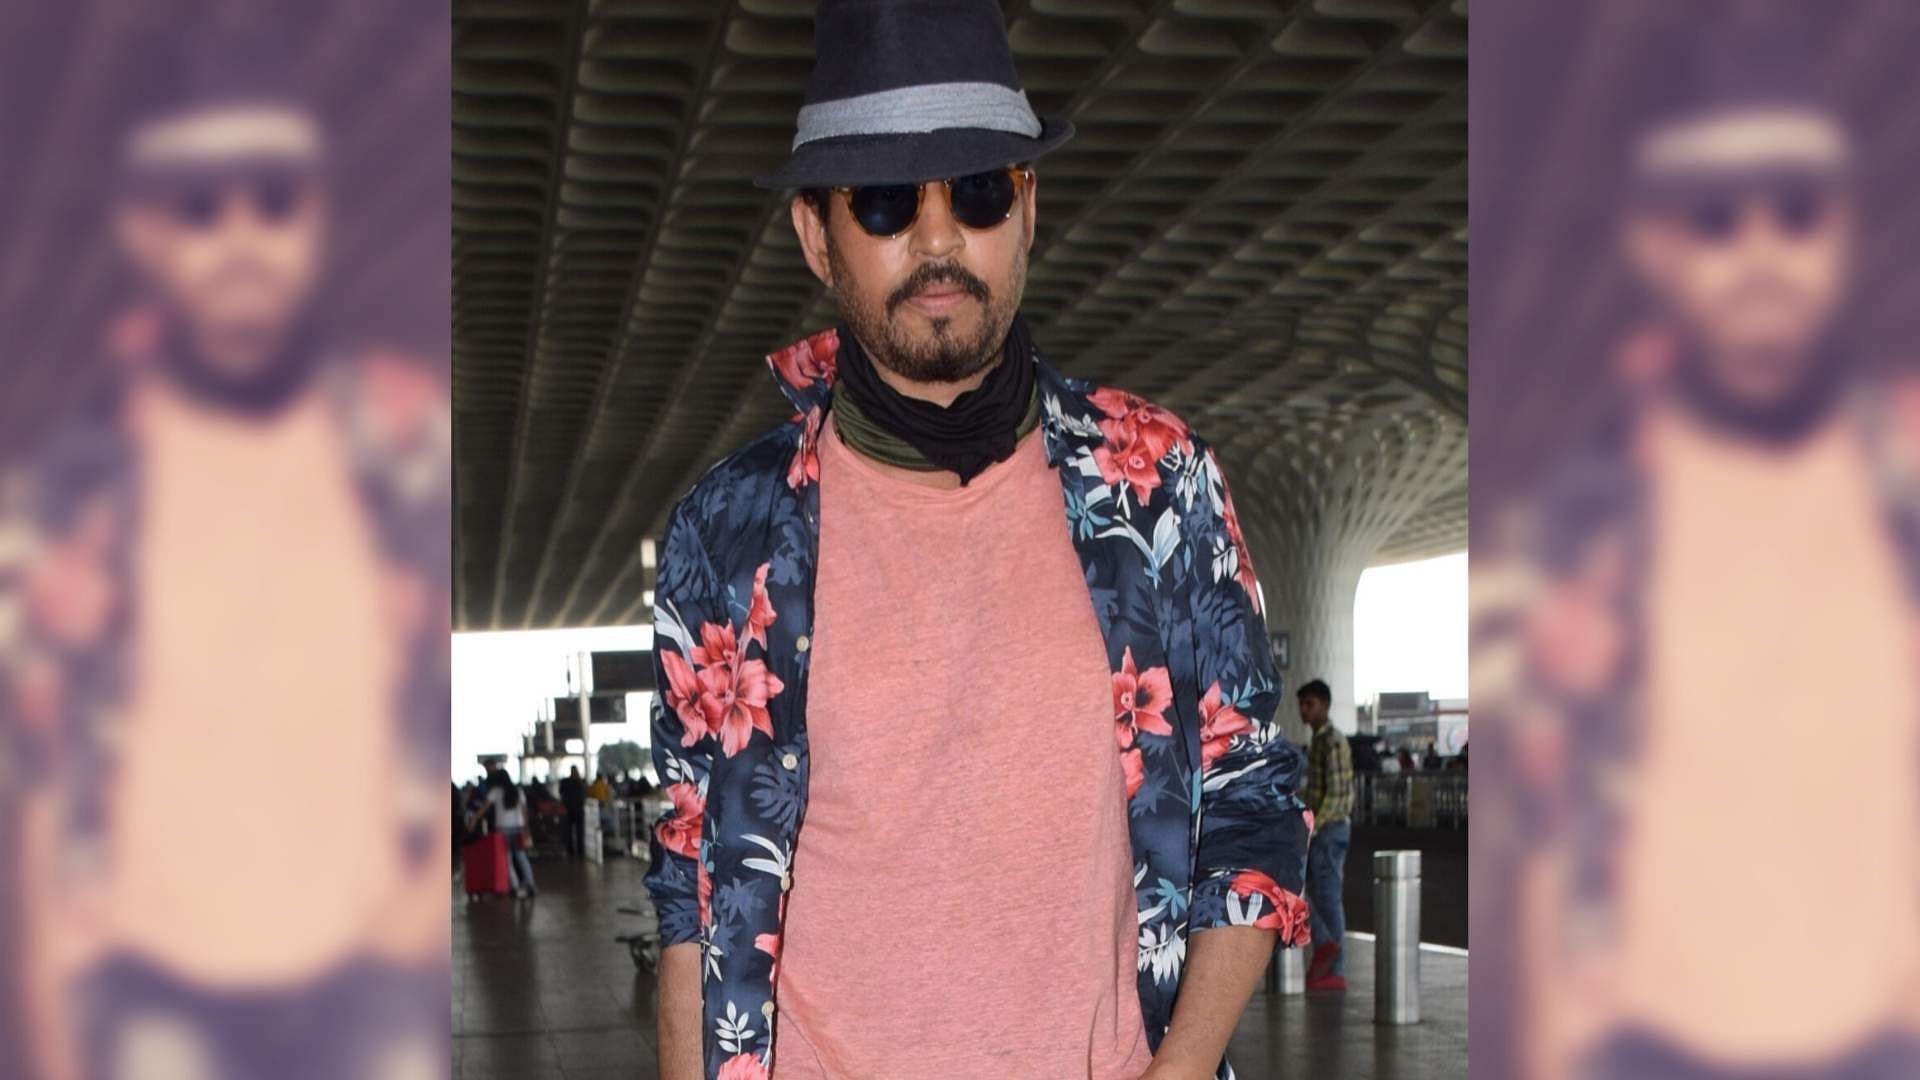 Irrfan Khan returns to India after seeking cancer treatment in London.